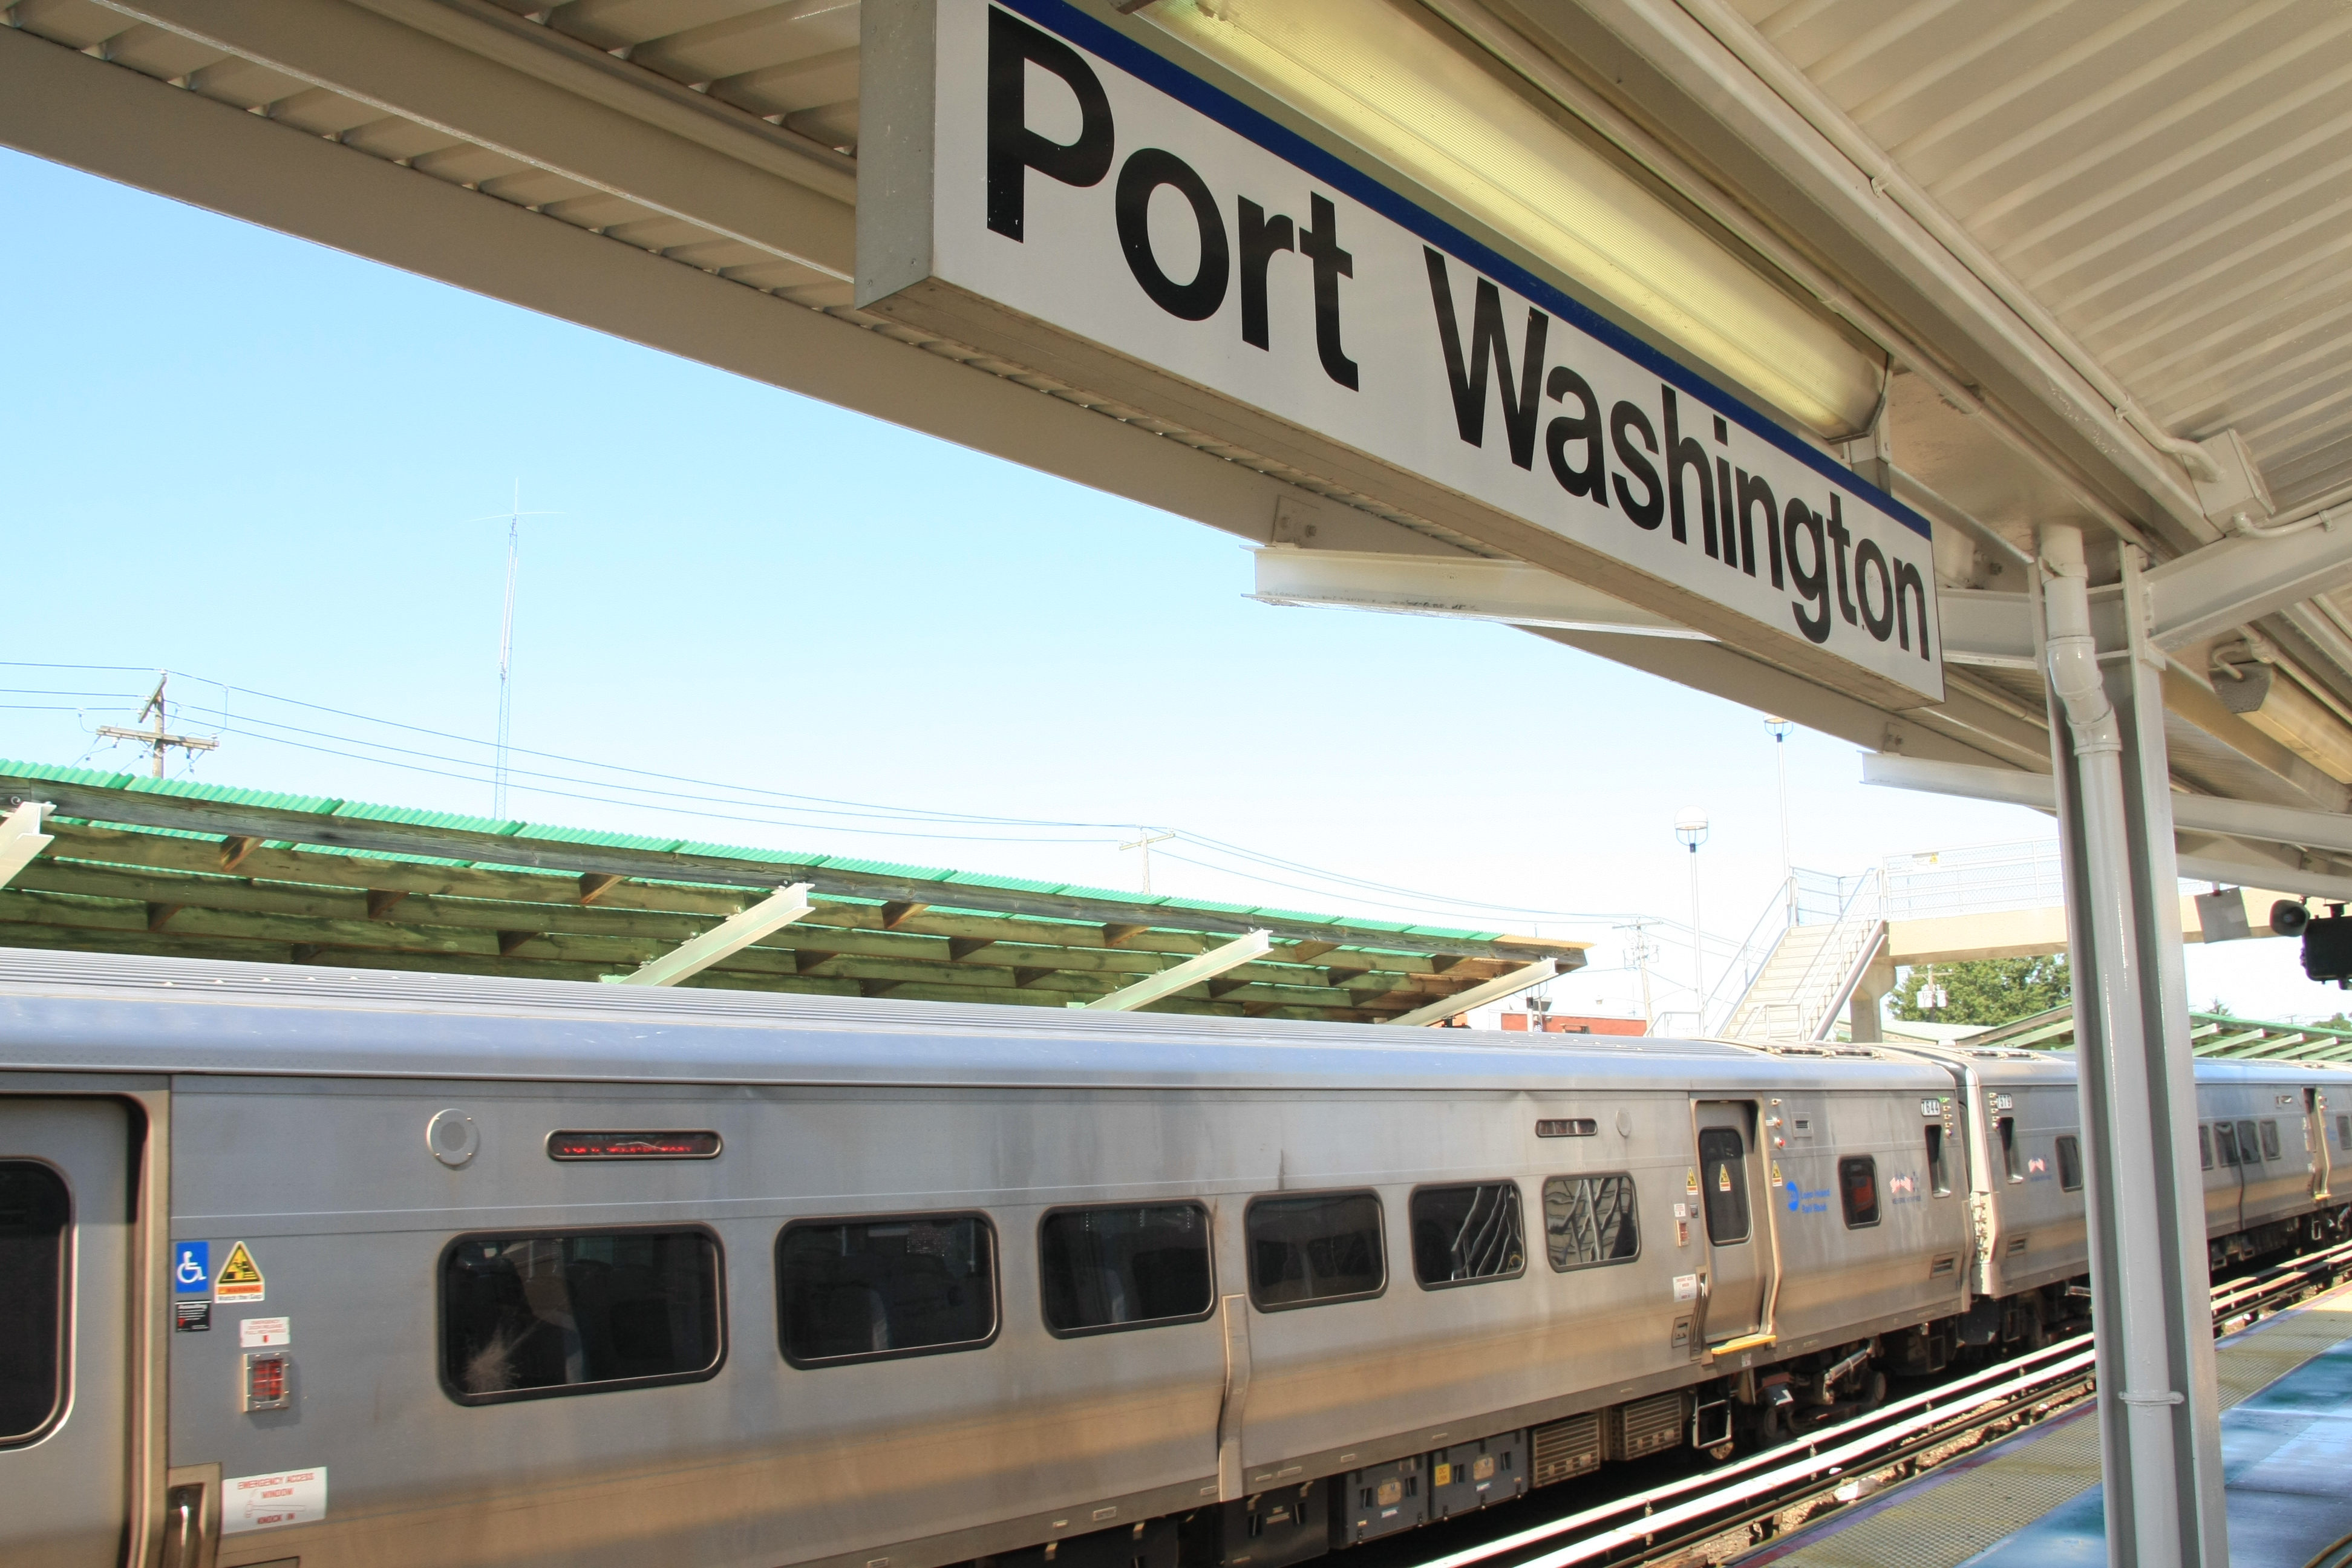 August 22: Buses Substitute for Trains Between Port Washington and Bayside